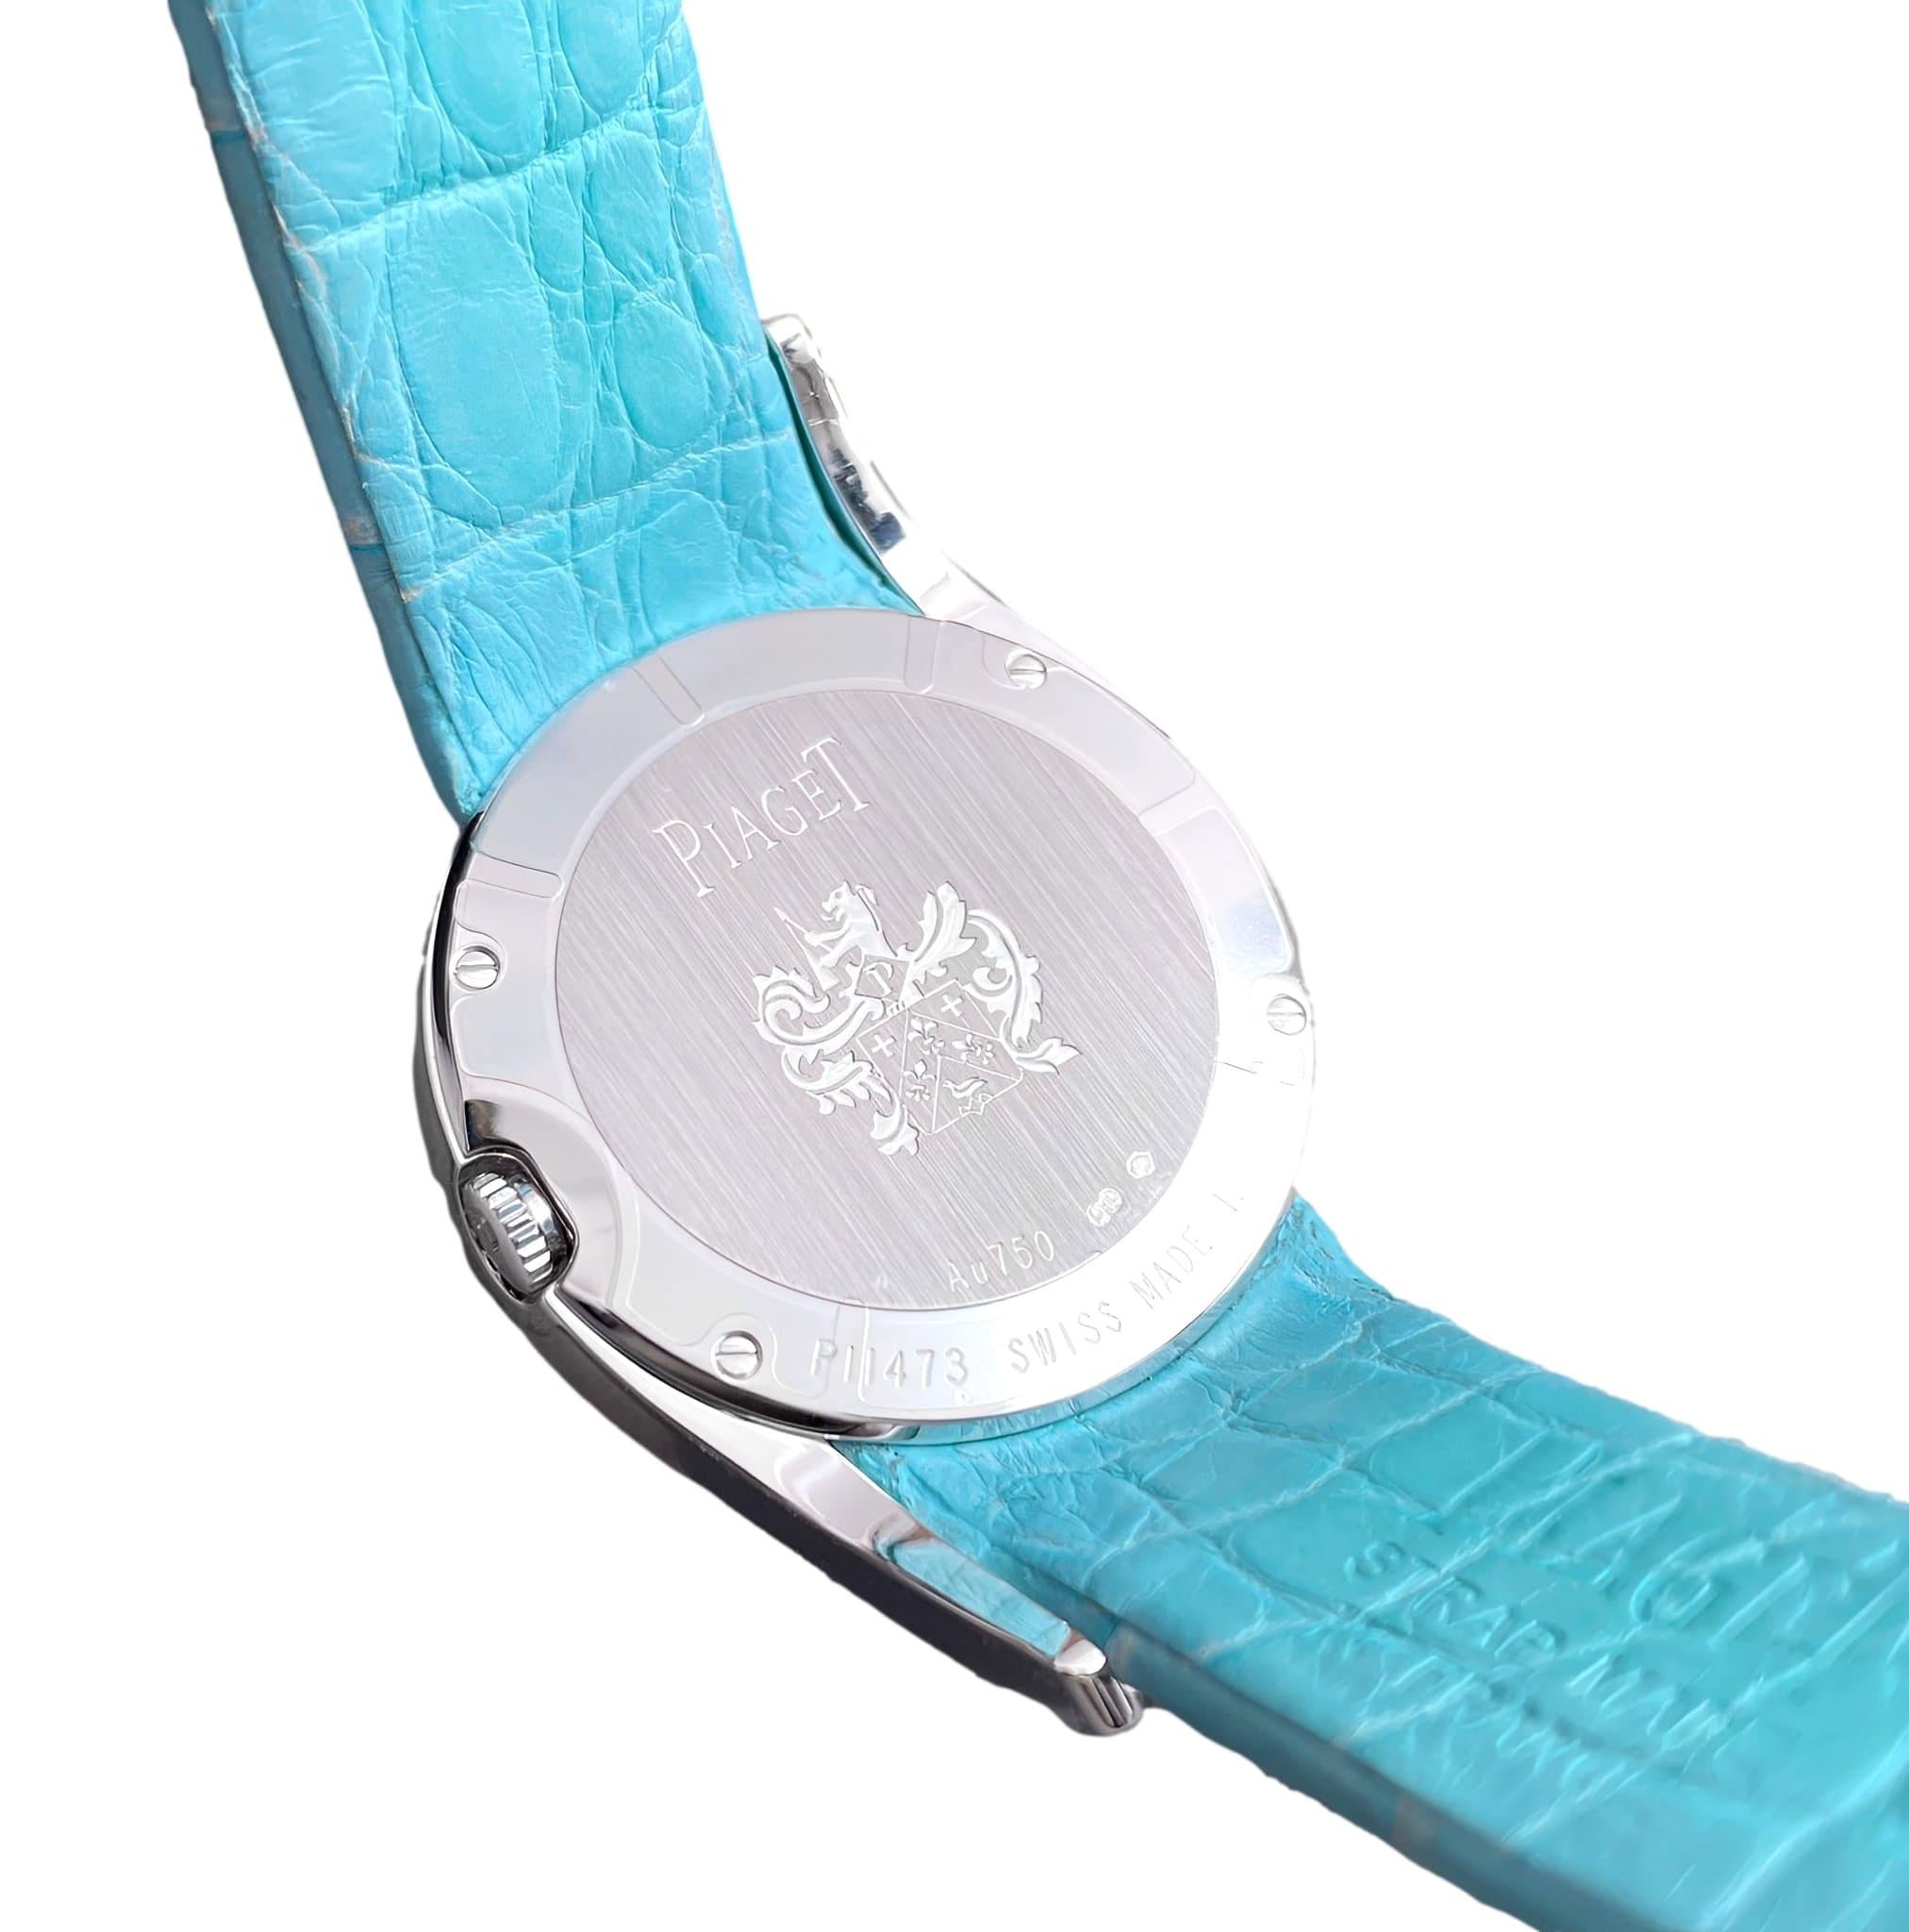 Brilliant Cut Piaget Limelight Gala Turquoise Dial Diamond Turquoise Leather Strap Watch G0A43